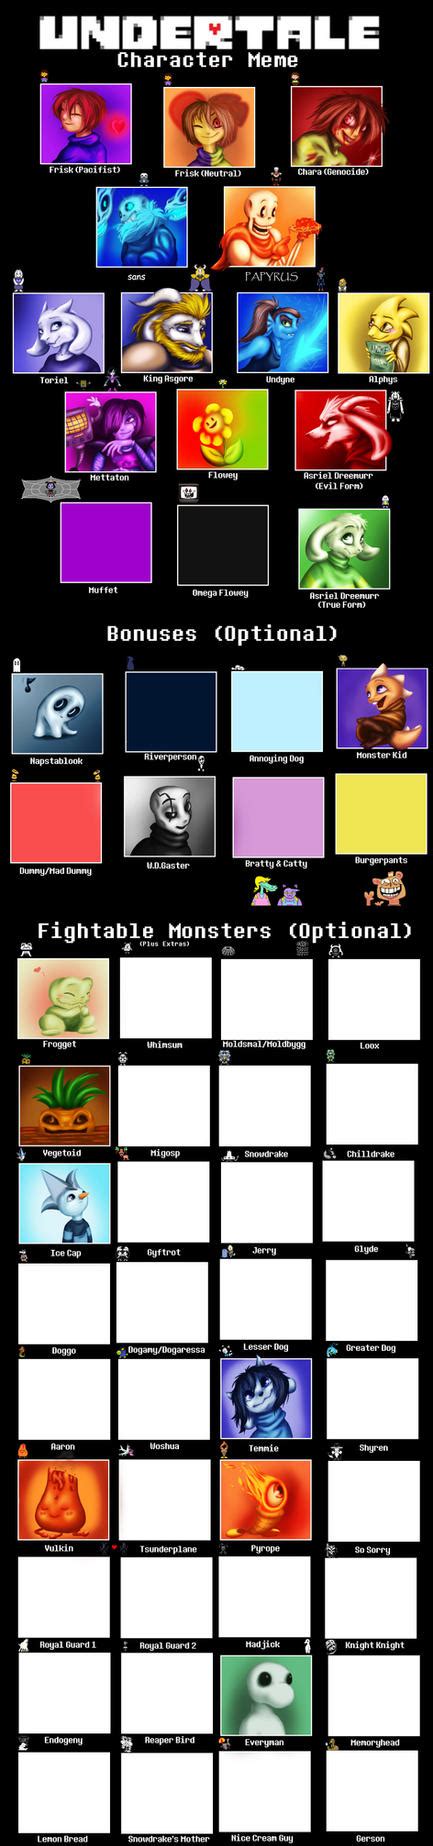 Undertale Character Meme By Mimmime On Deviantart